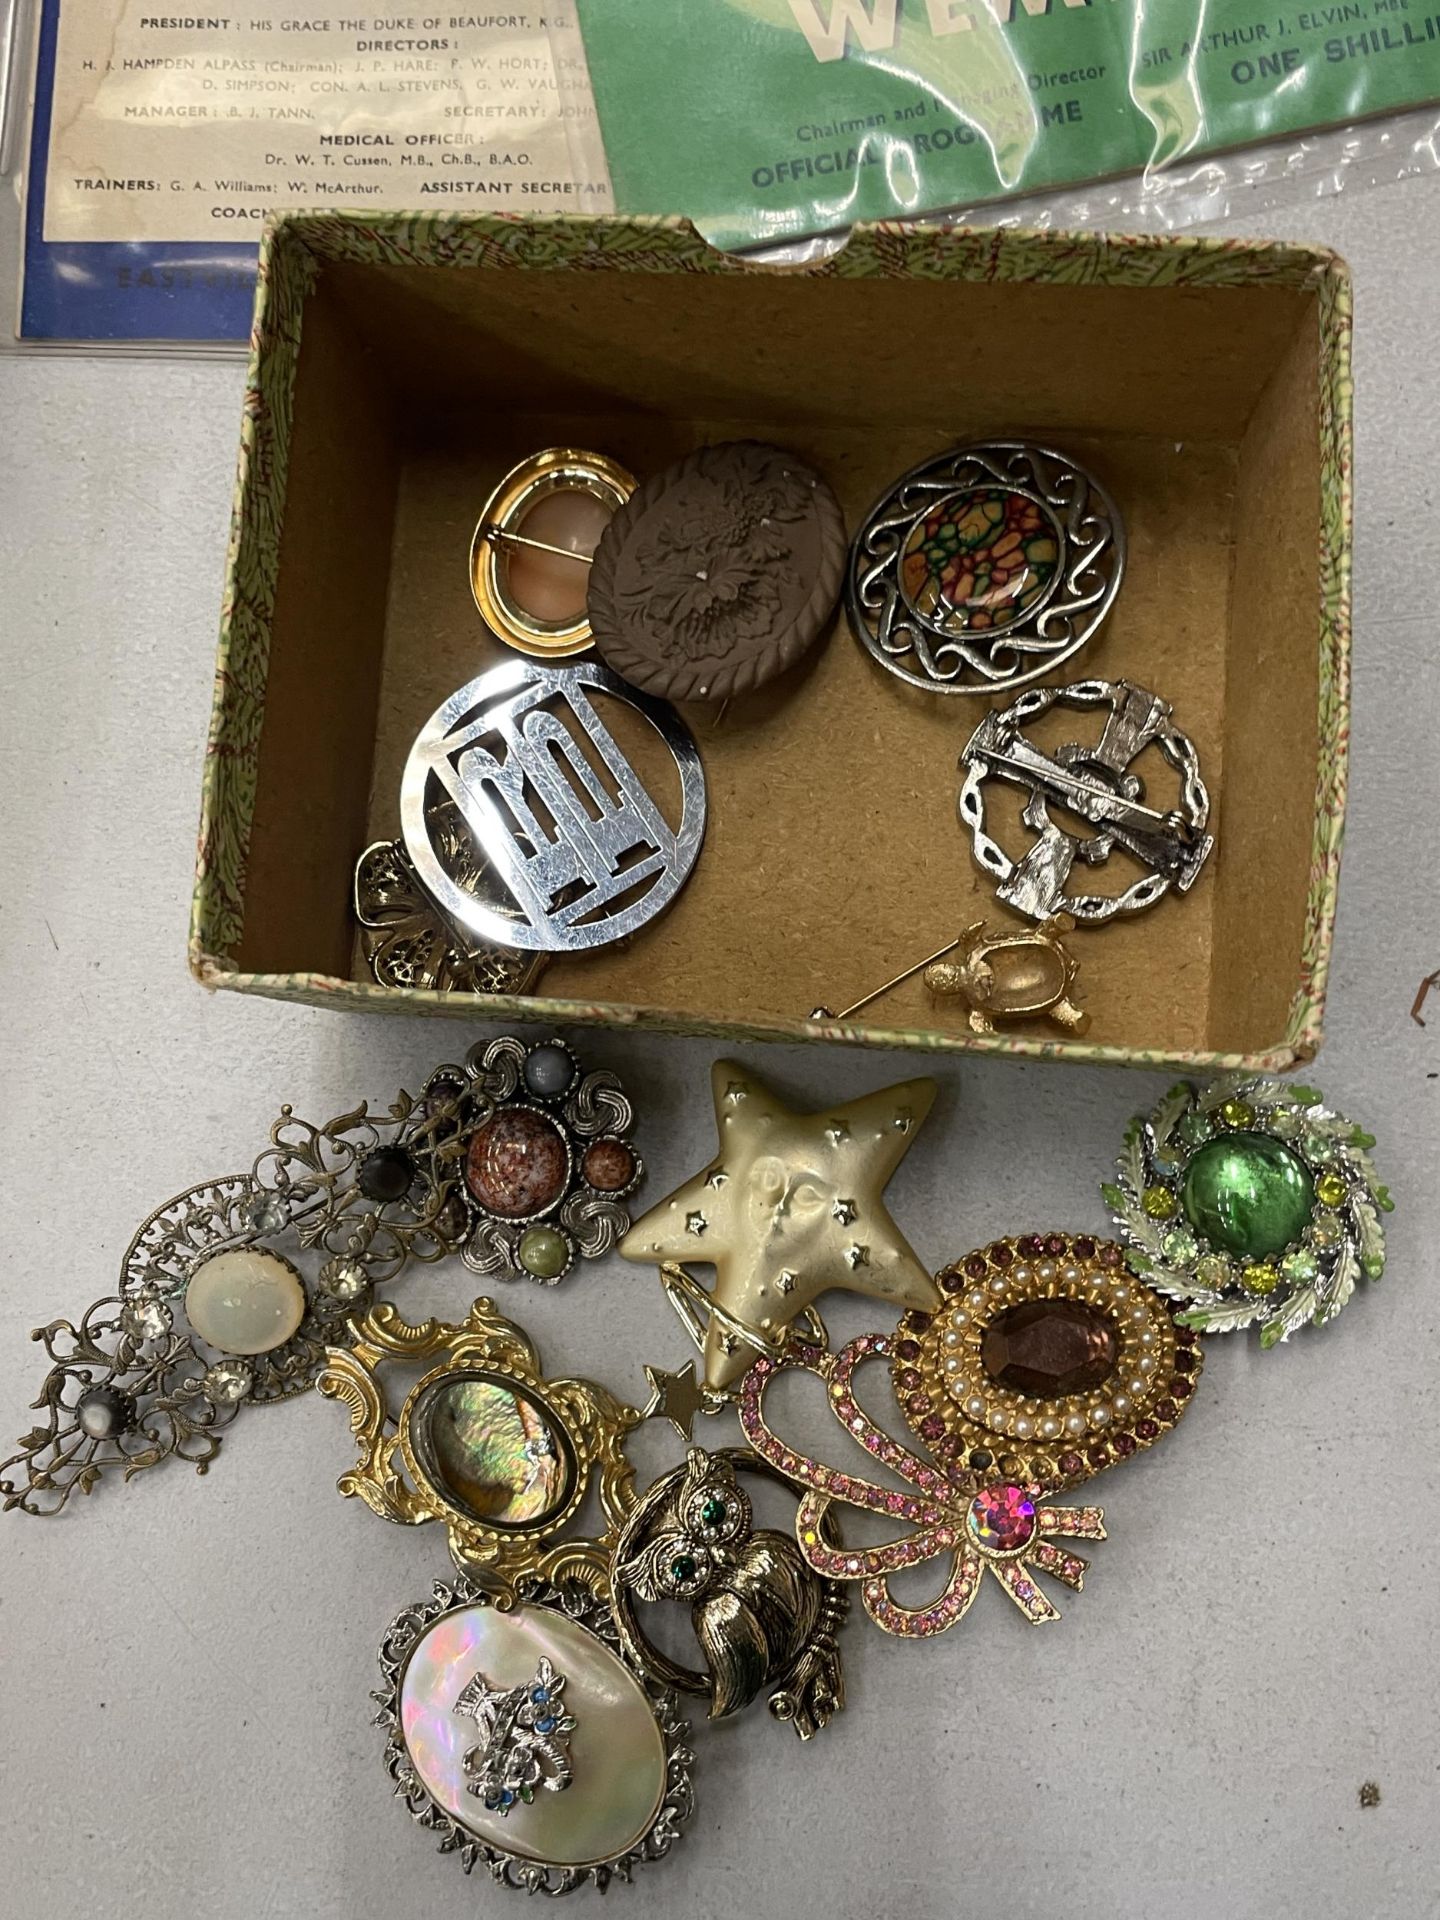 A QUANTITY OF VINTAGE COSTUME JEWELLERY BROOCHES - 16 IN TOTAL